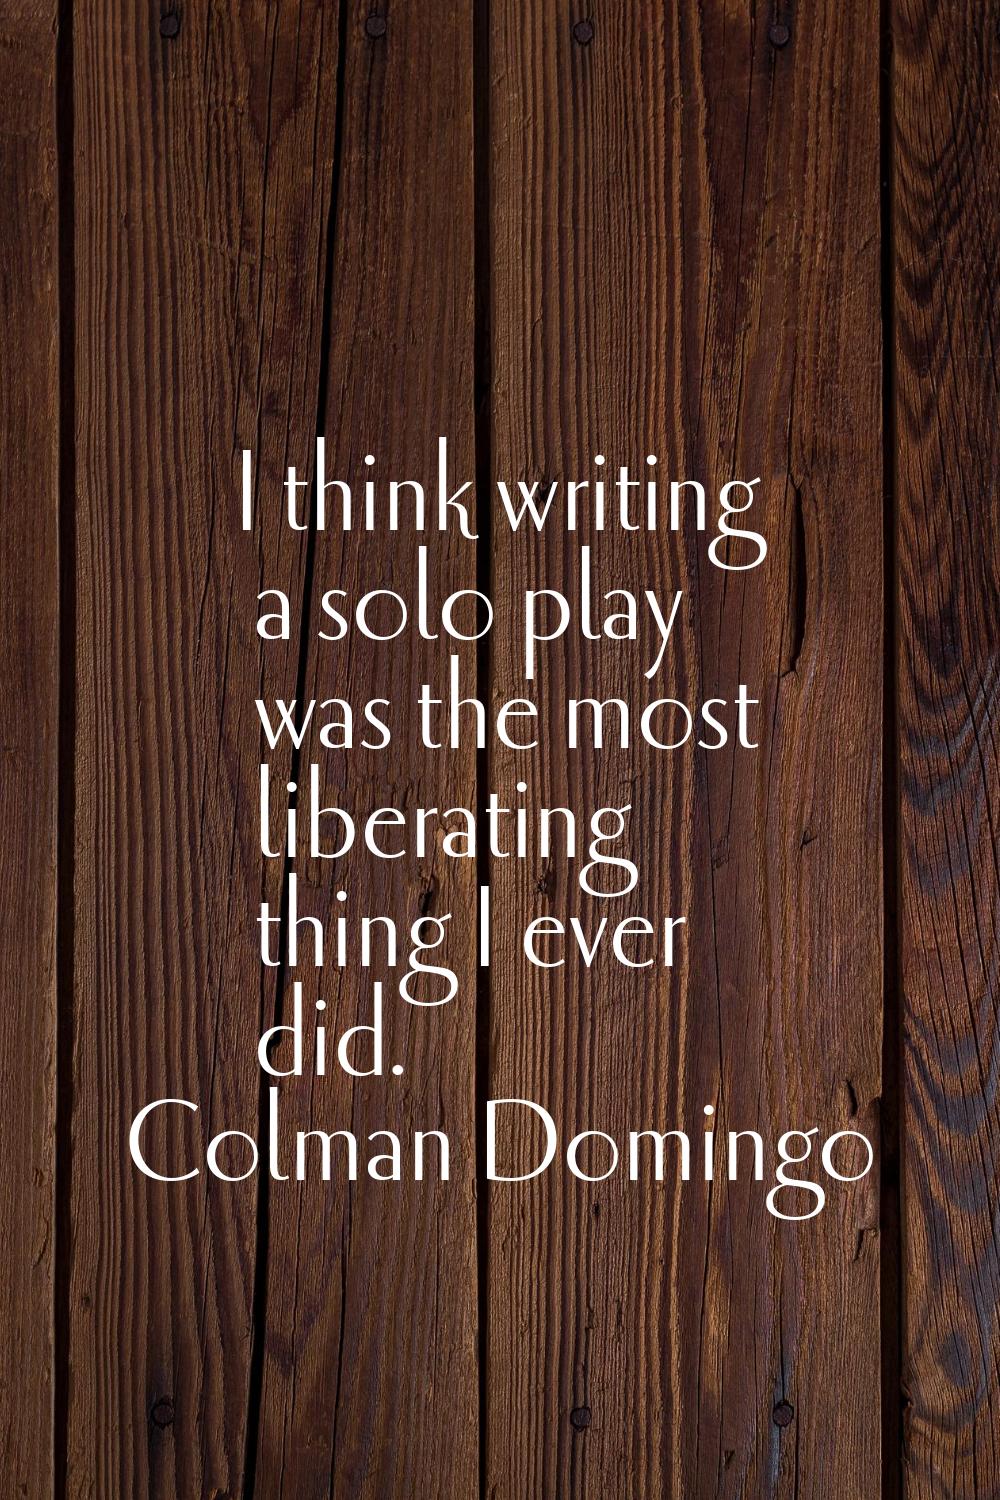 I think writing a solo play was the most liberating thing I ever did.